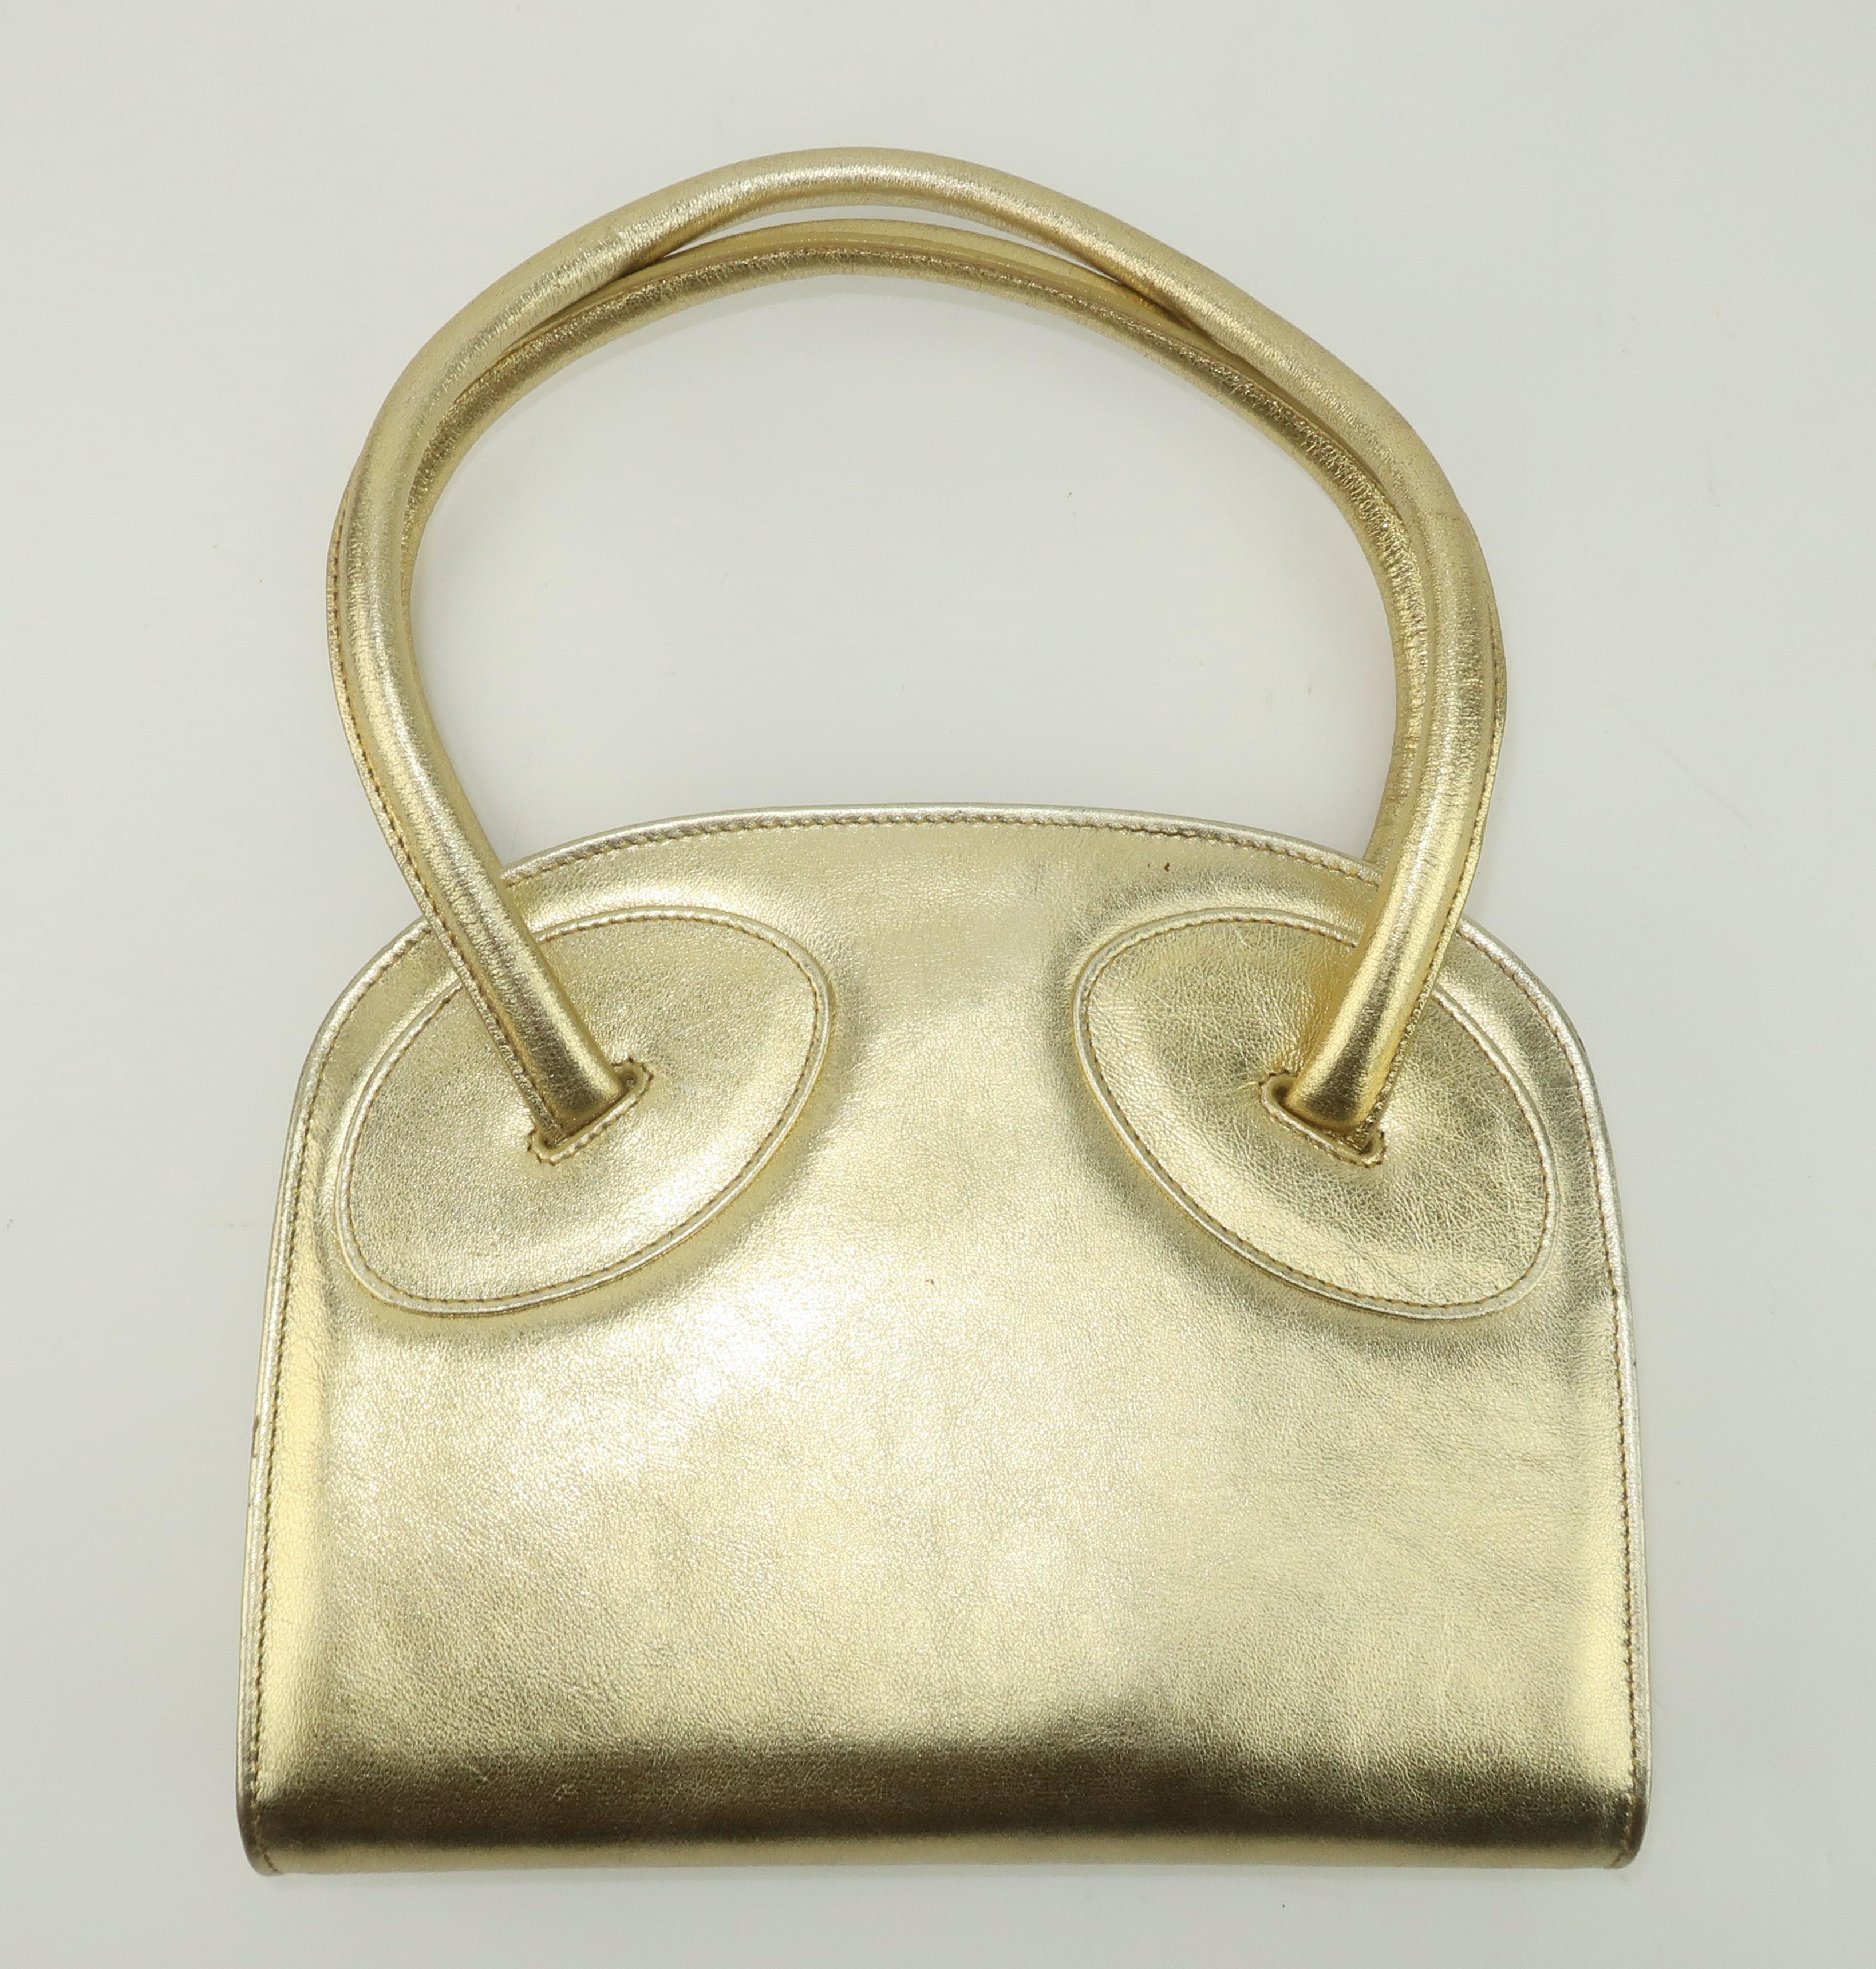 Laura Biagiotti Attributed Gold Leather Handbag, 1970's For Sale 1